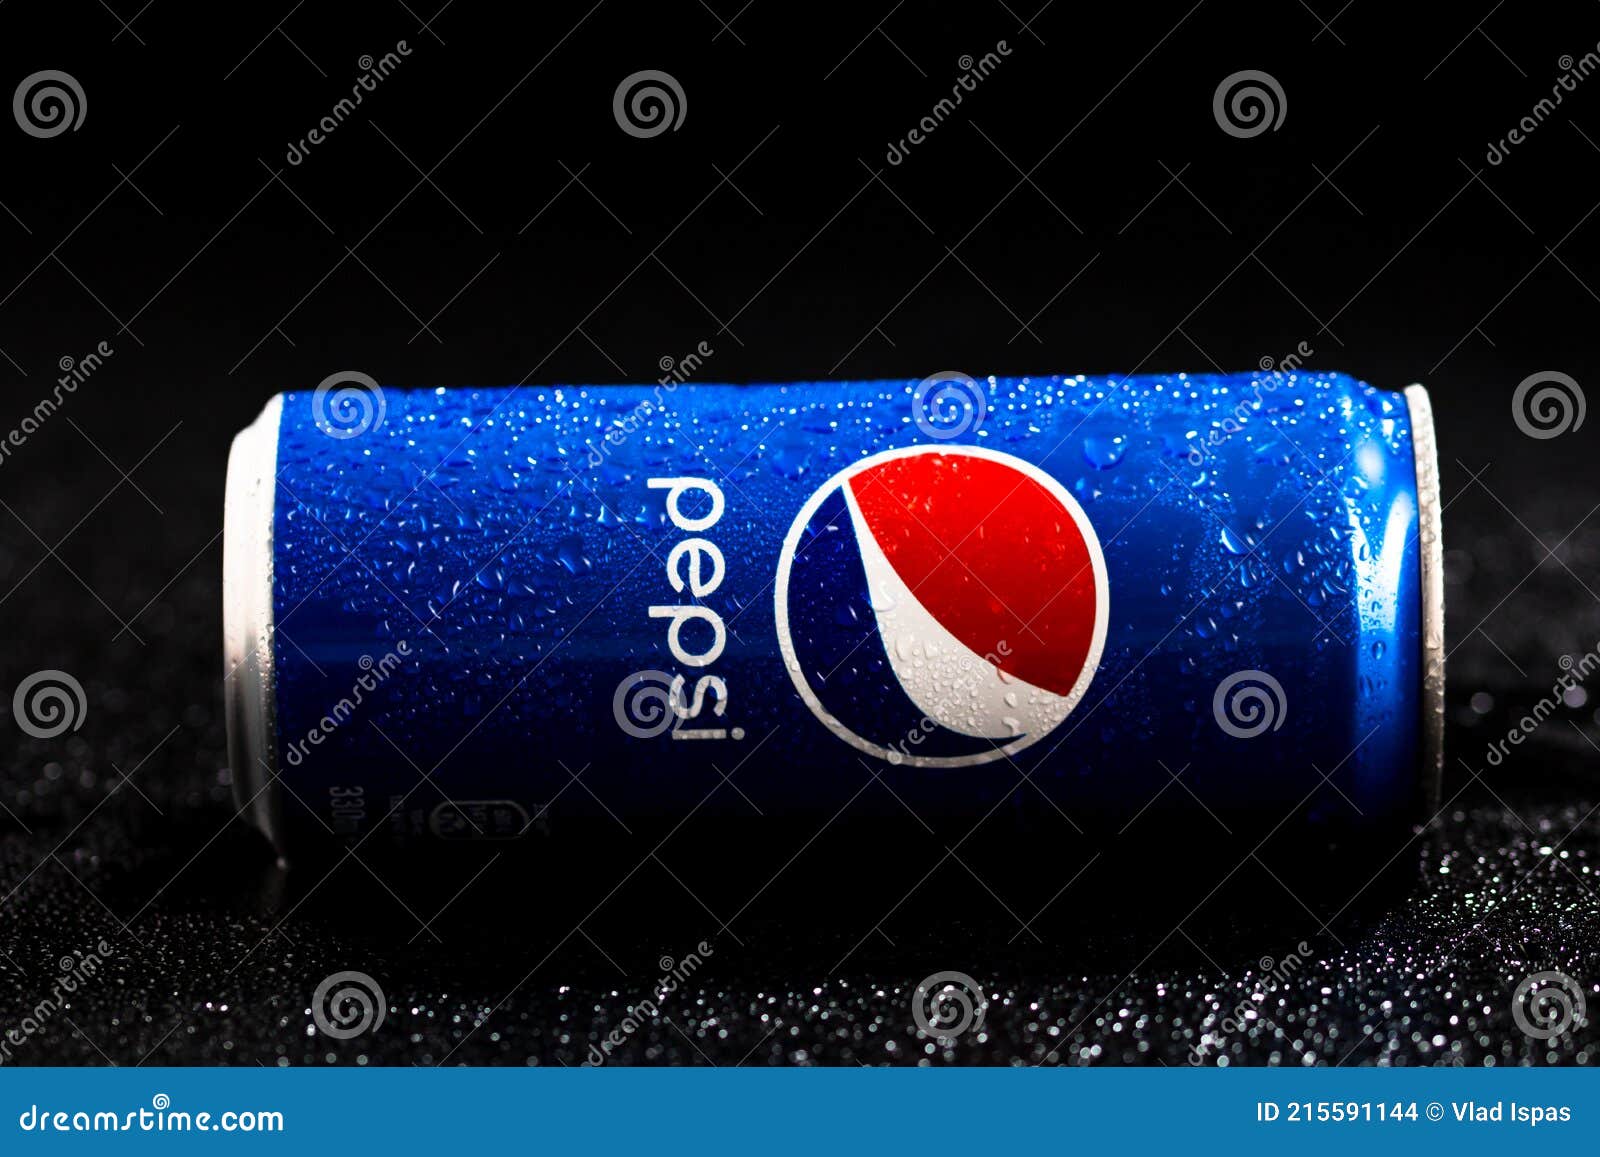 Editorial Photo of Pepsi Can with Water Droplets on Black Background ...